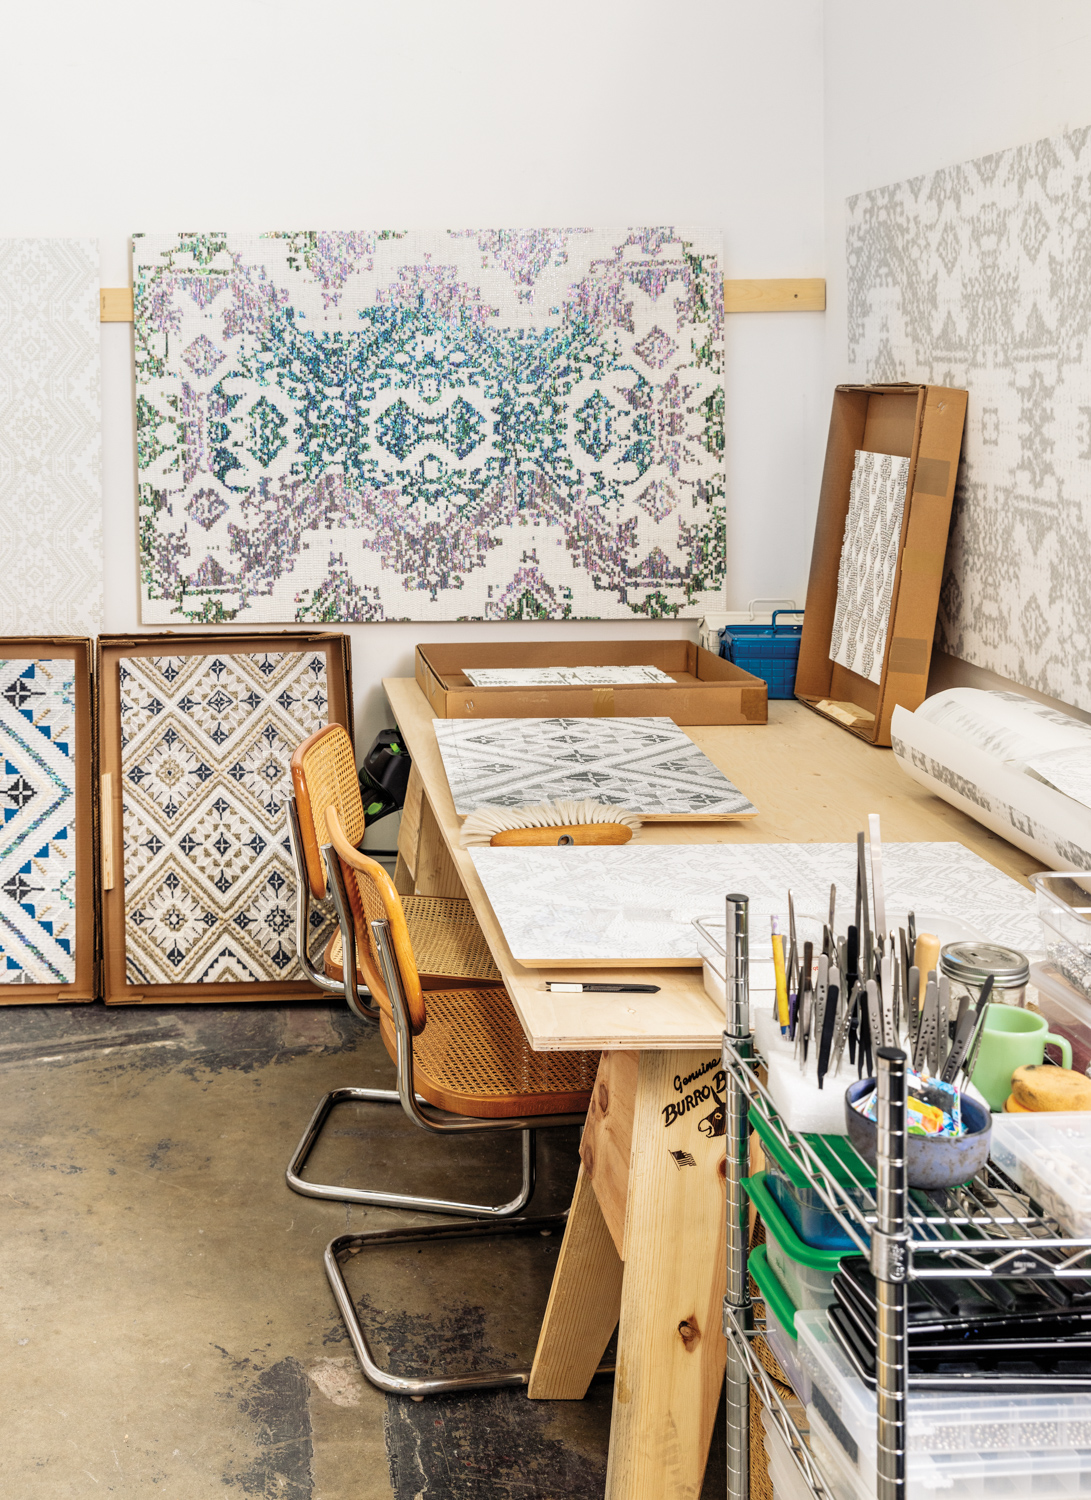 A work table in the artist's studio.